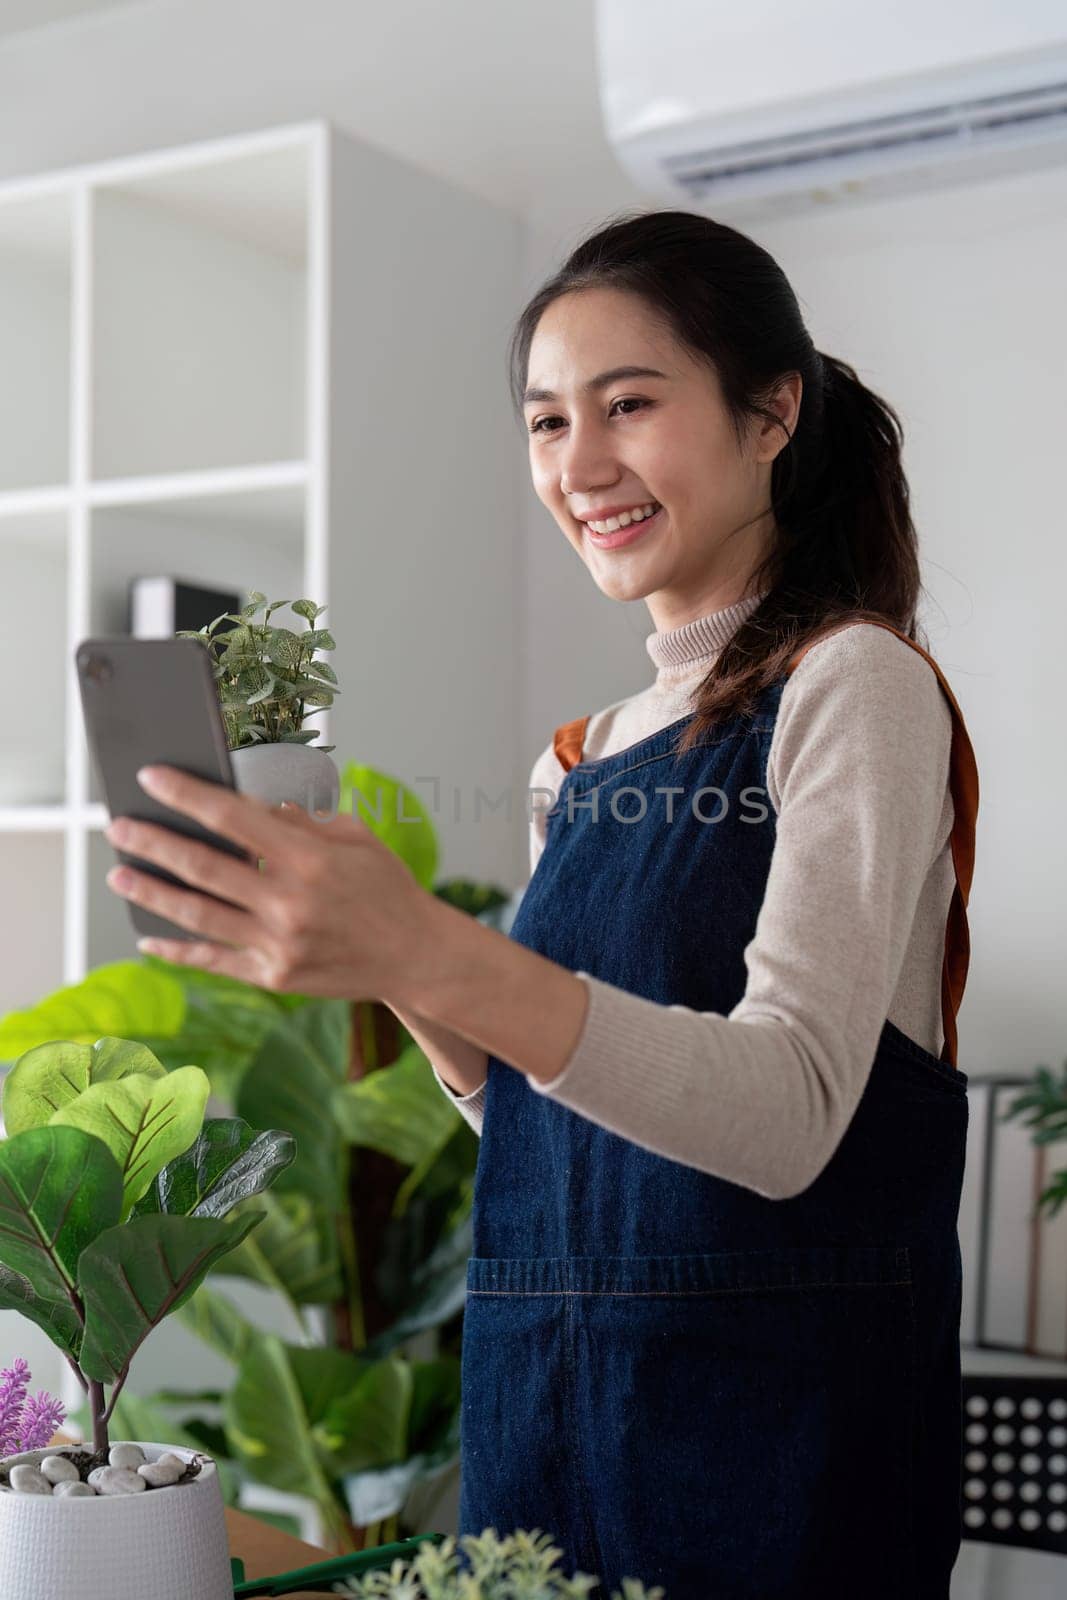 The concept of eco friendly housing, plant care and gardening. Relax home gardening. Gardener woman asian take a selfie with plant. Smiling woman takes care of plant by nateemee